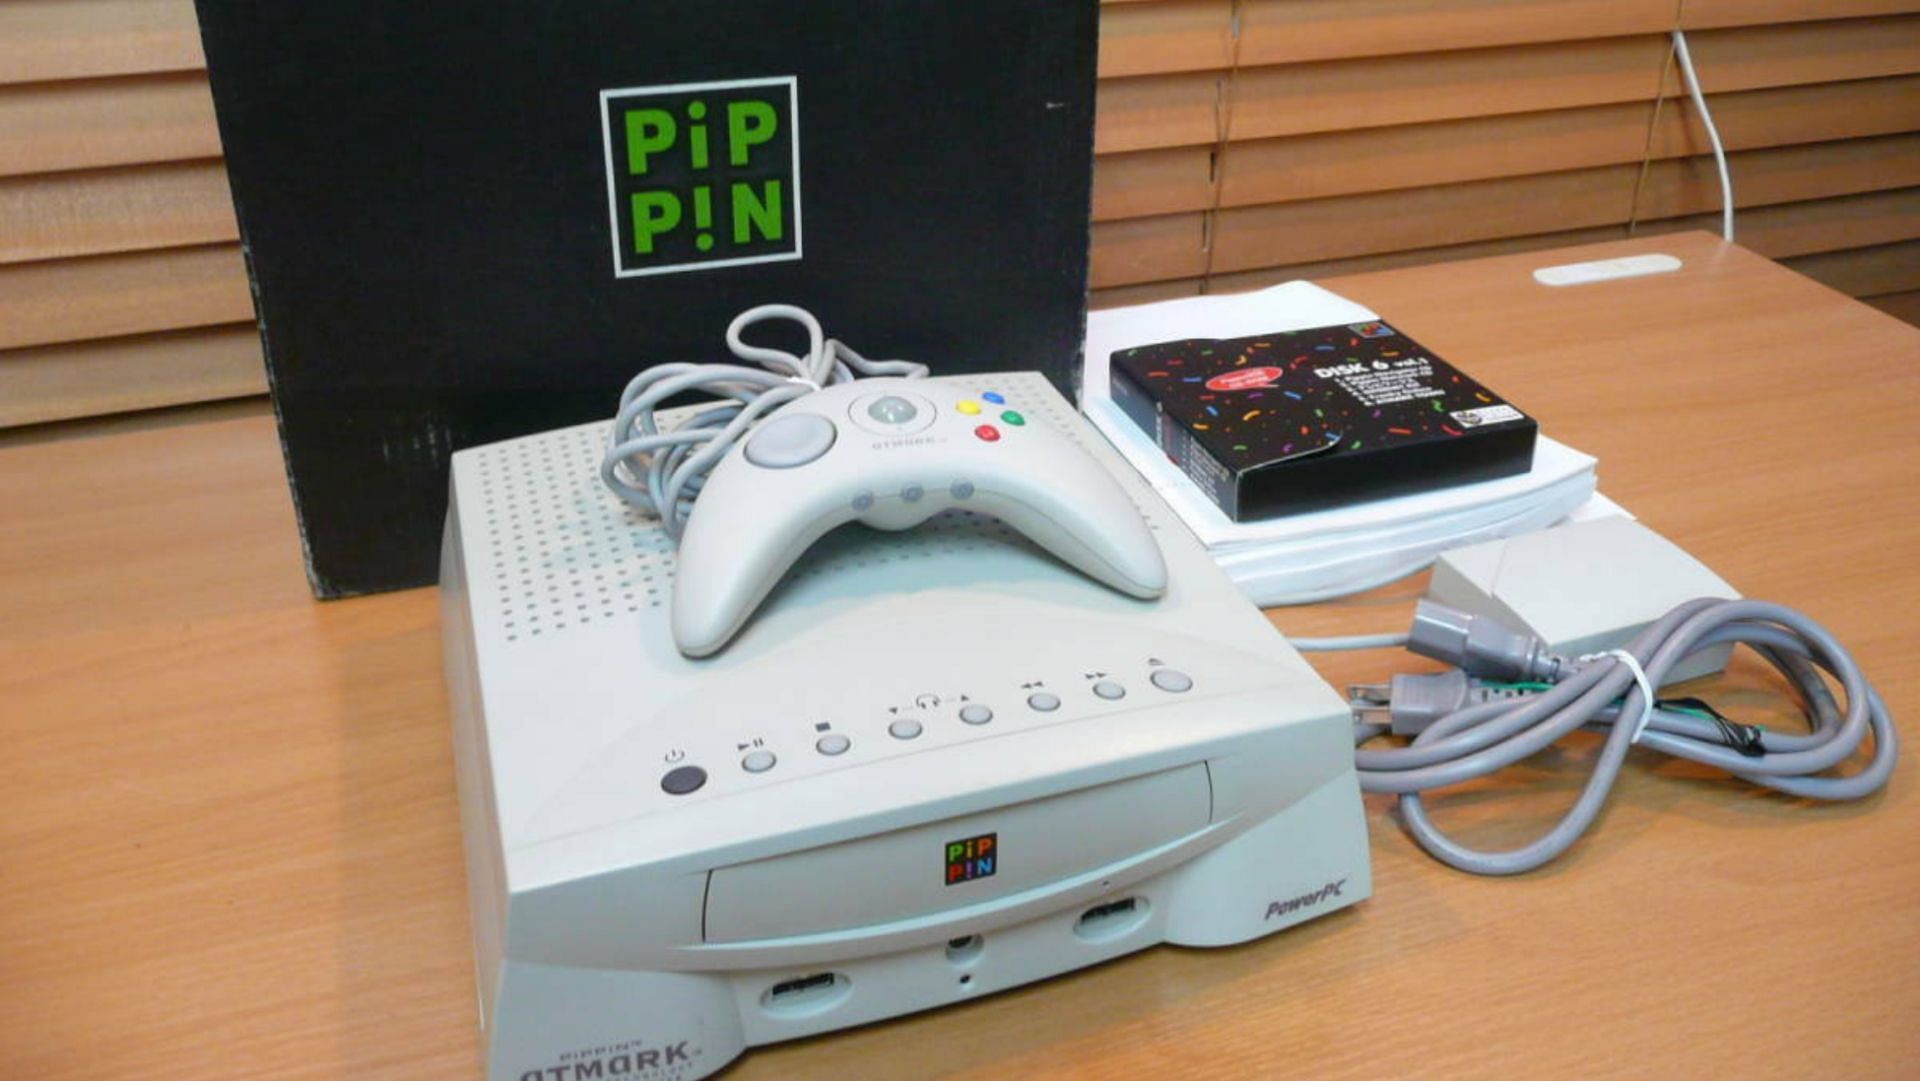 The Pippin is one of the more infamous products that the tech giant will like to forget (Image via Bandai)